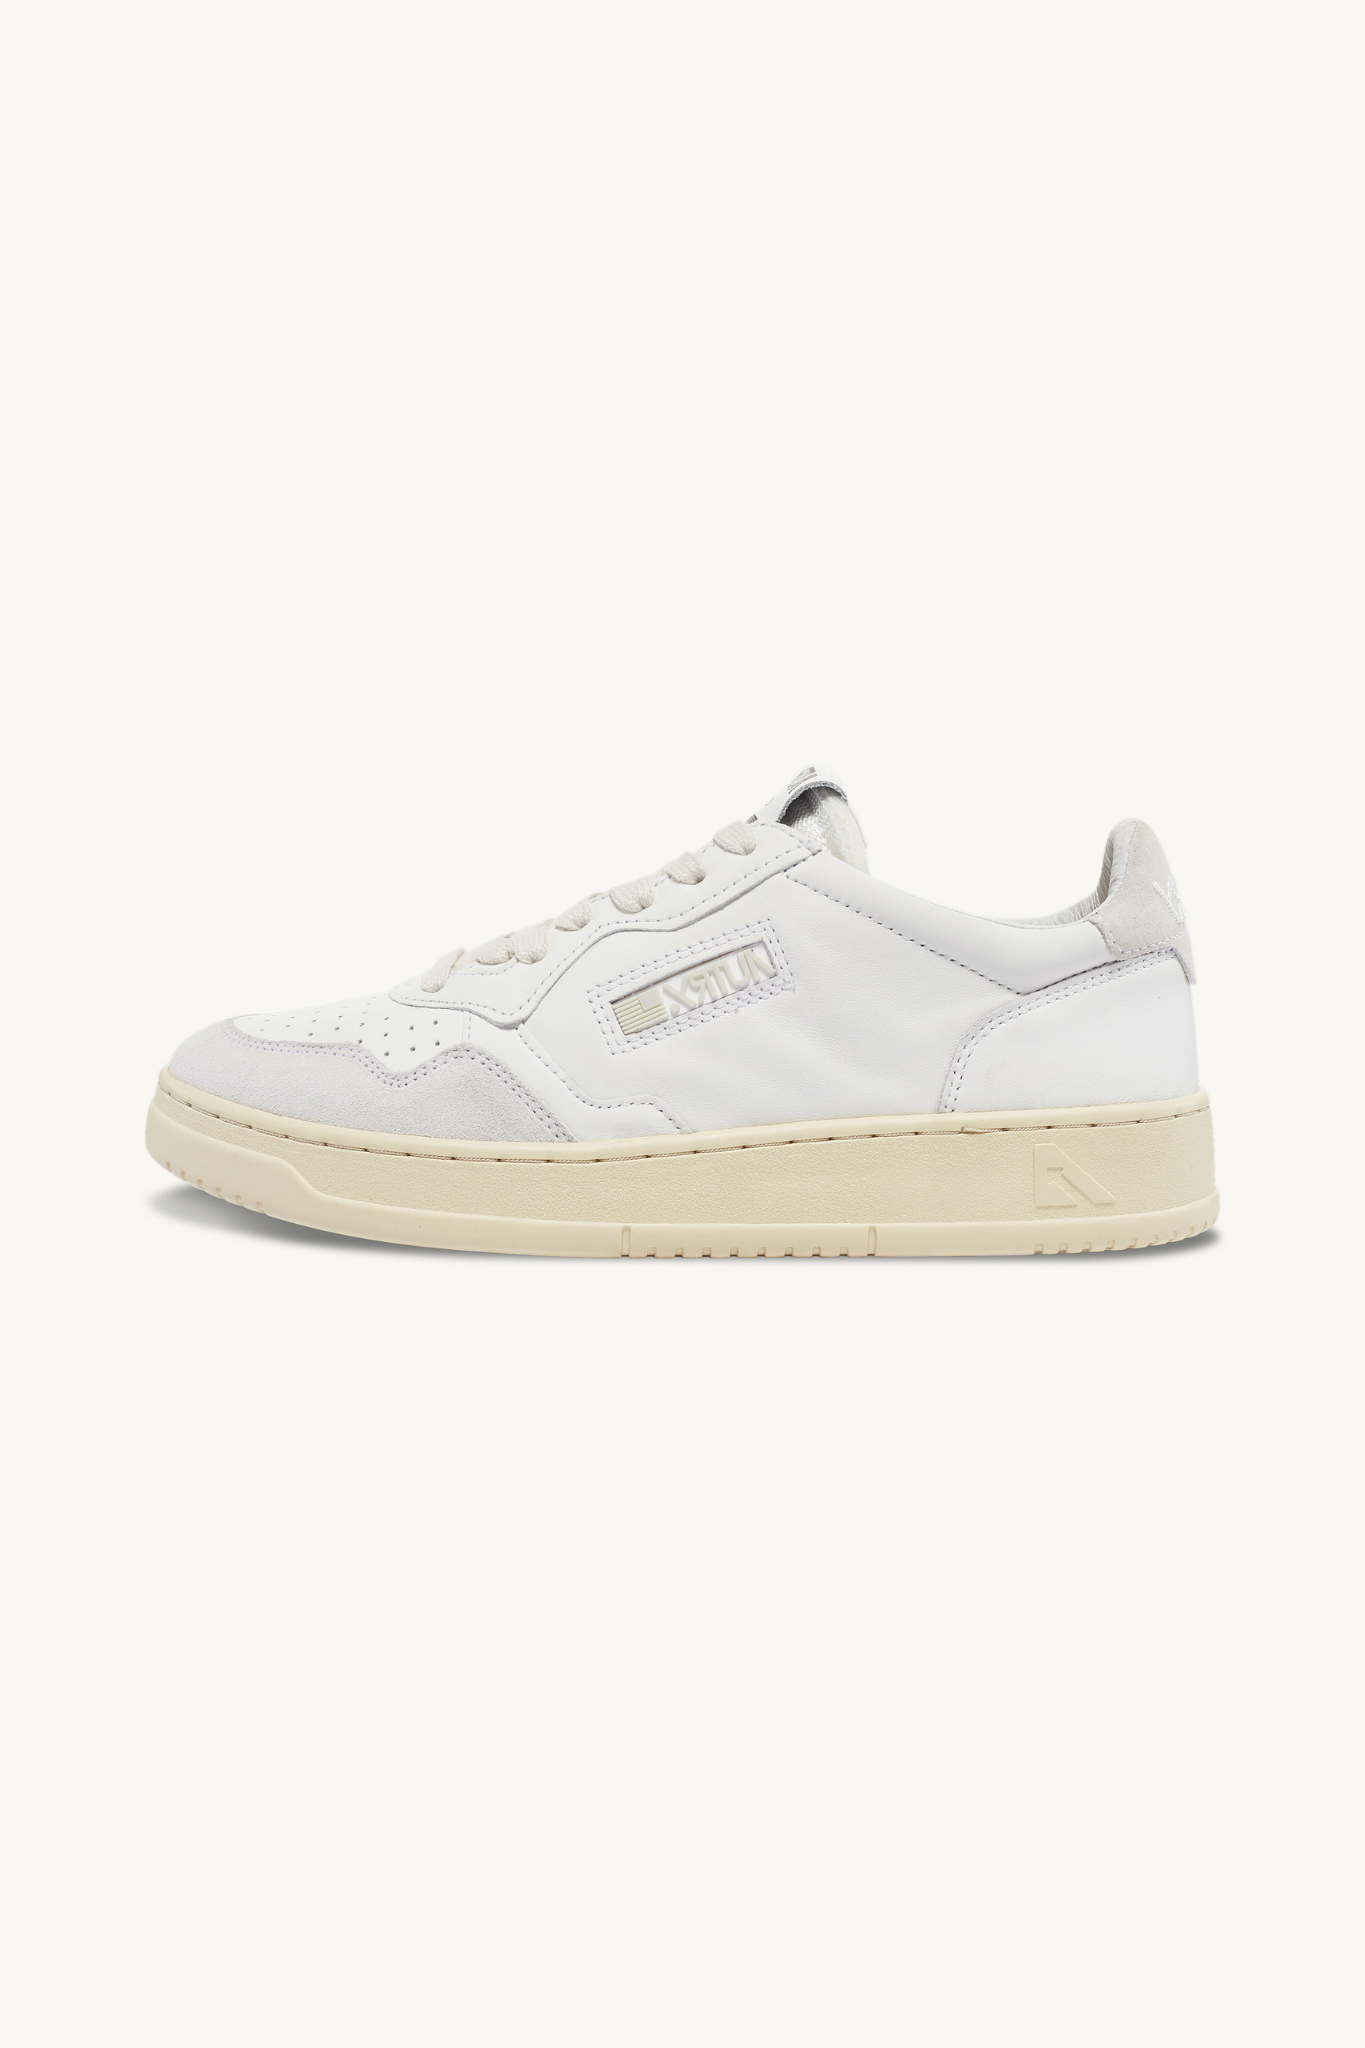 AOLM-CE10 - OPEN LOW SNEAKER - LEATHER/LEATHER WHITE